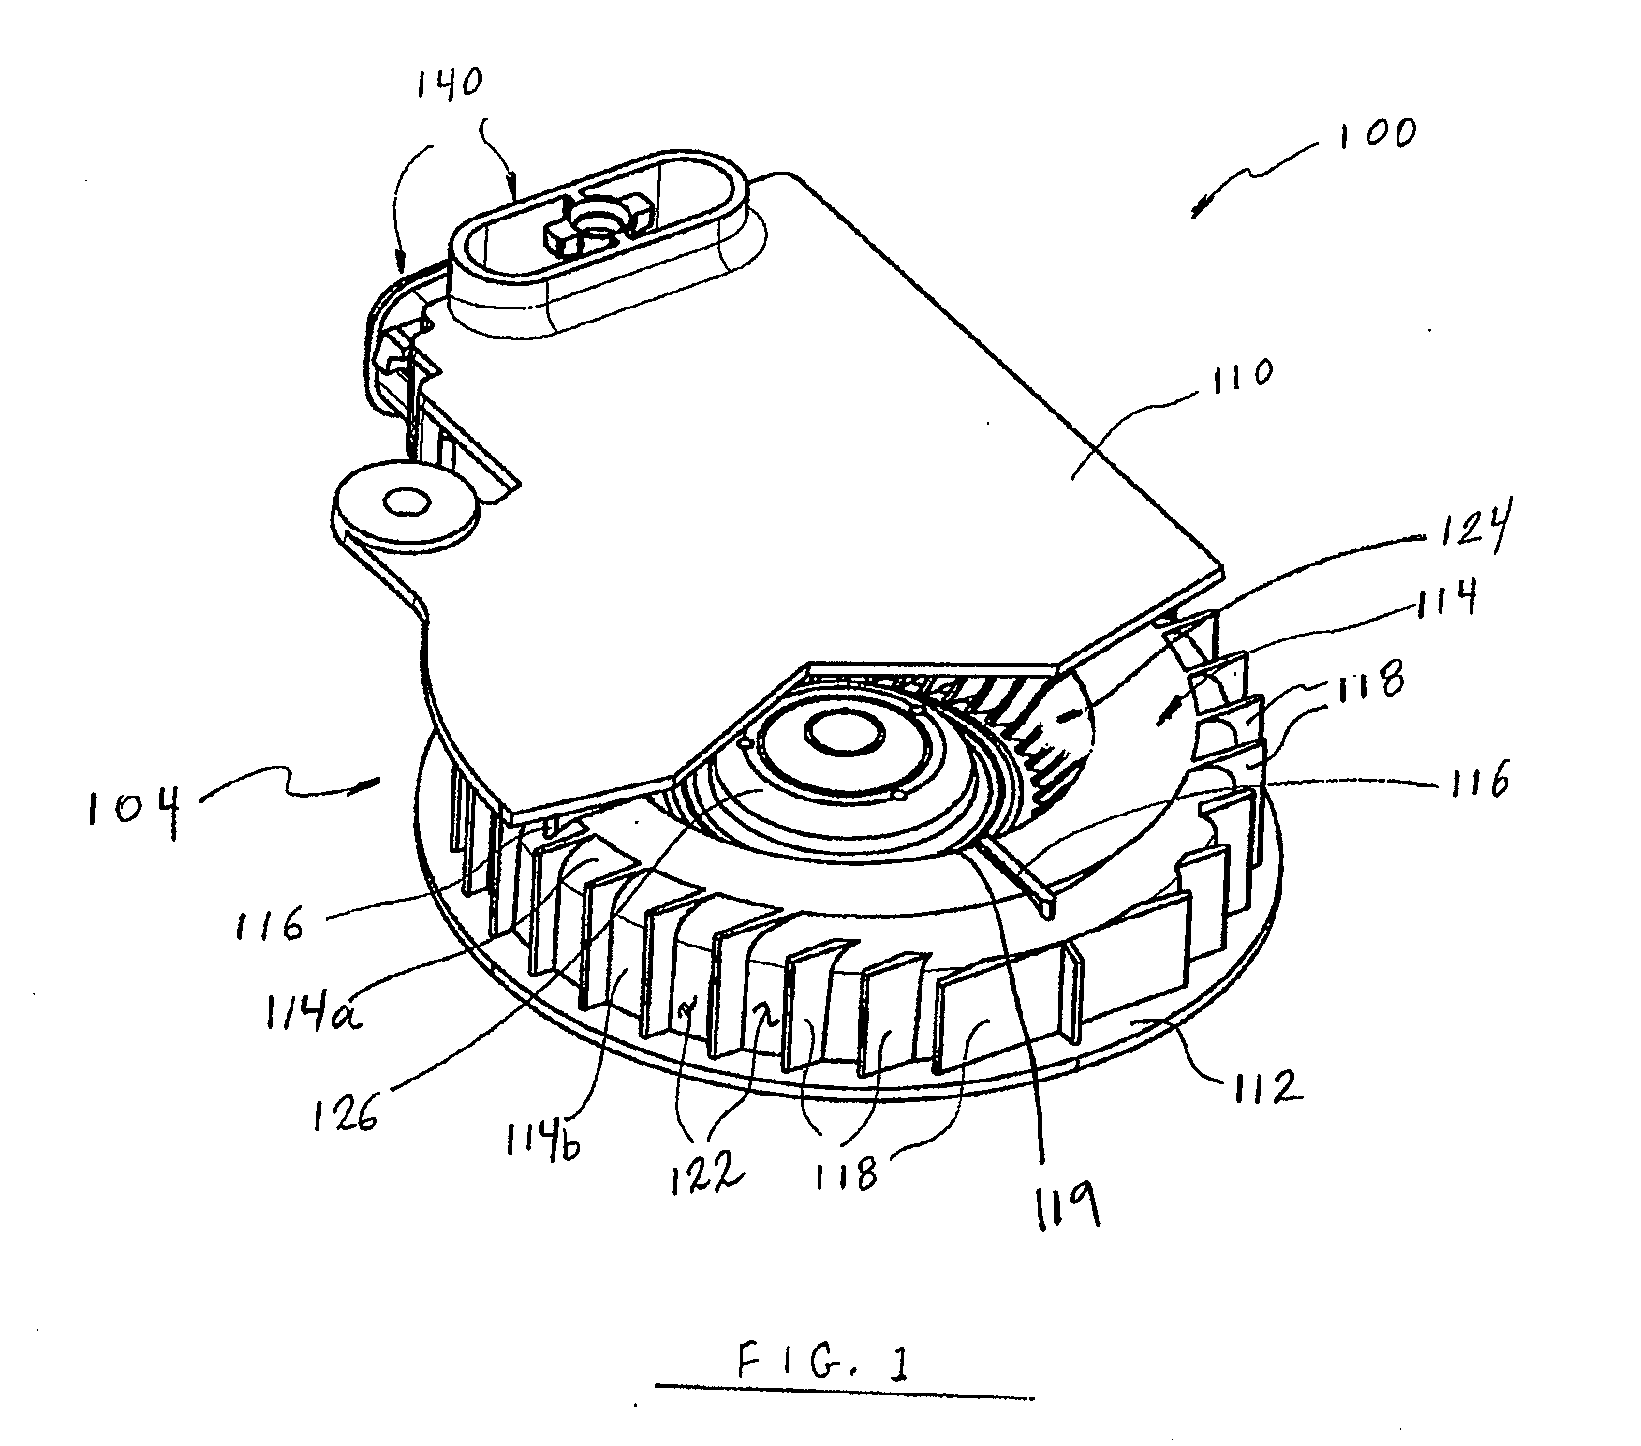 Blower housing for climate controlled systems